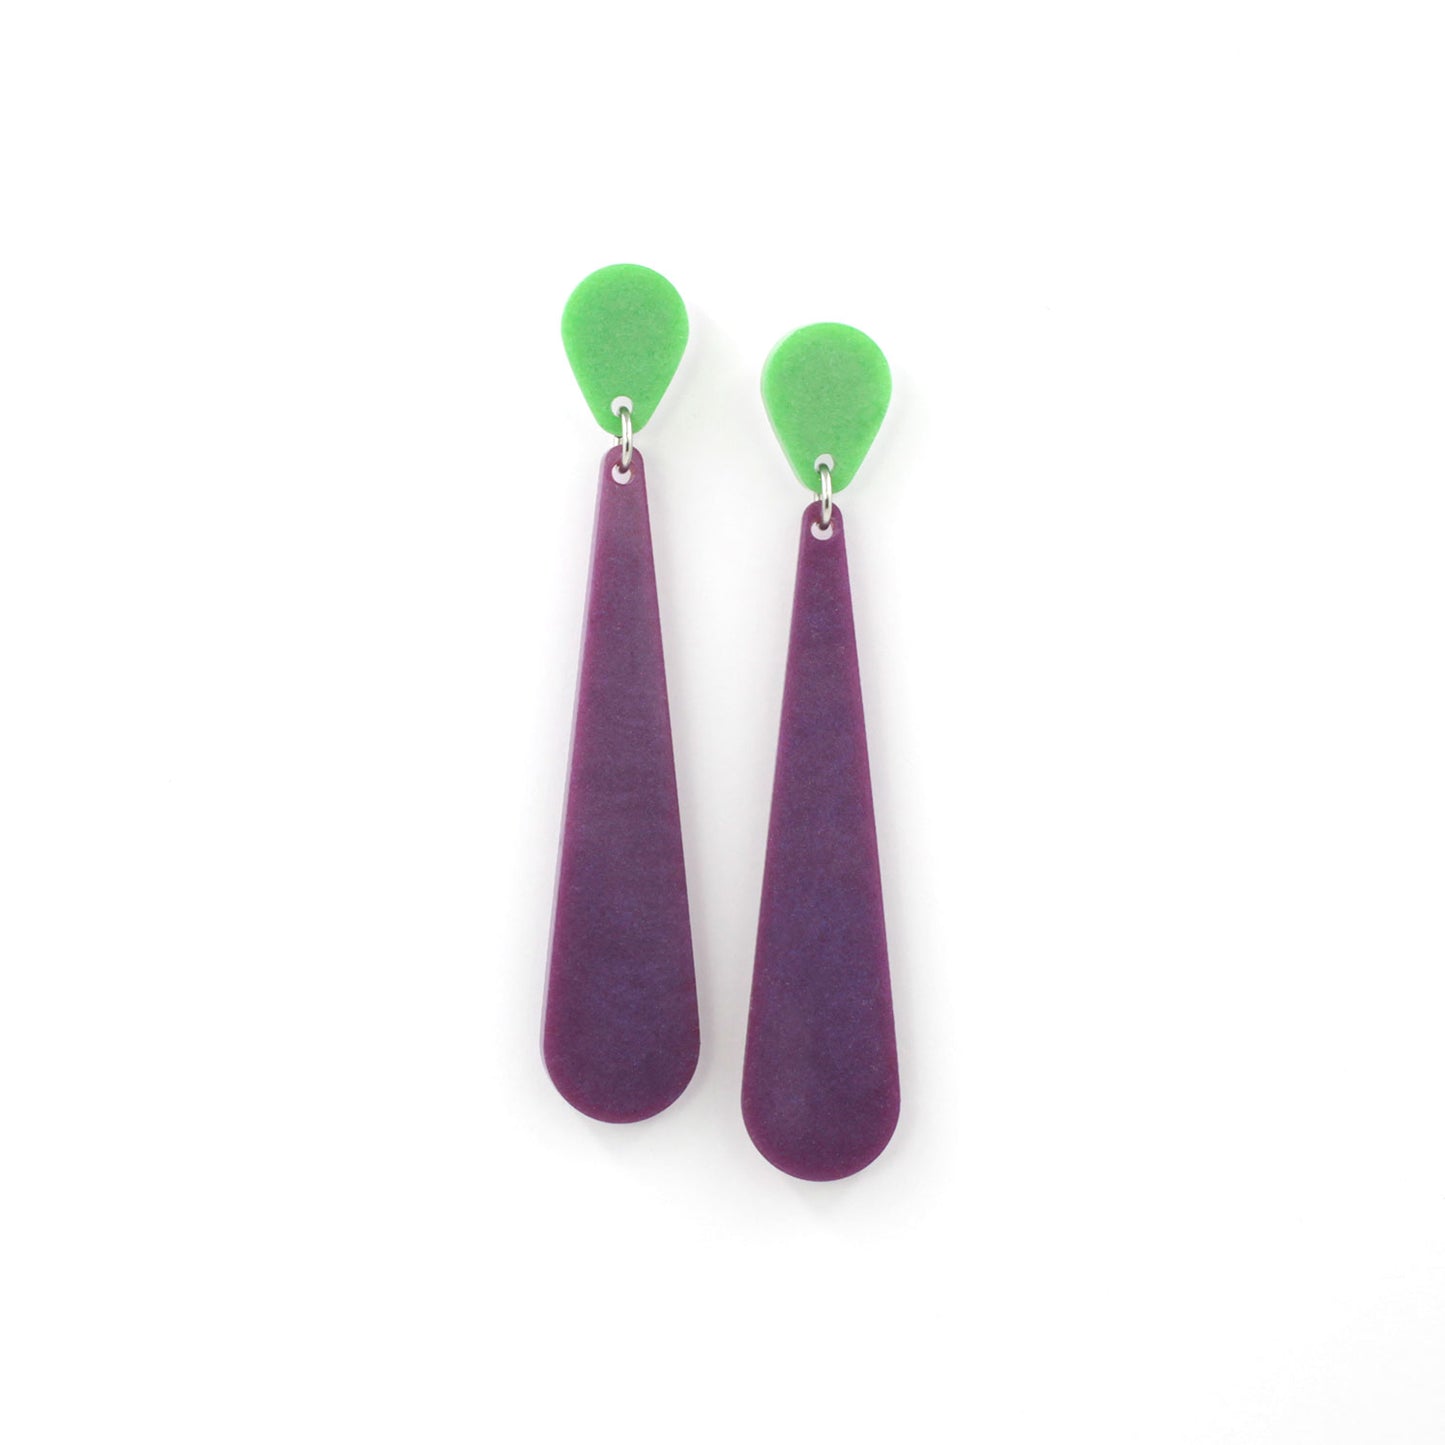 this is a pendulum dangle earrings on a white background. The pendulums are purple and the top of the earrings are lime green.